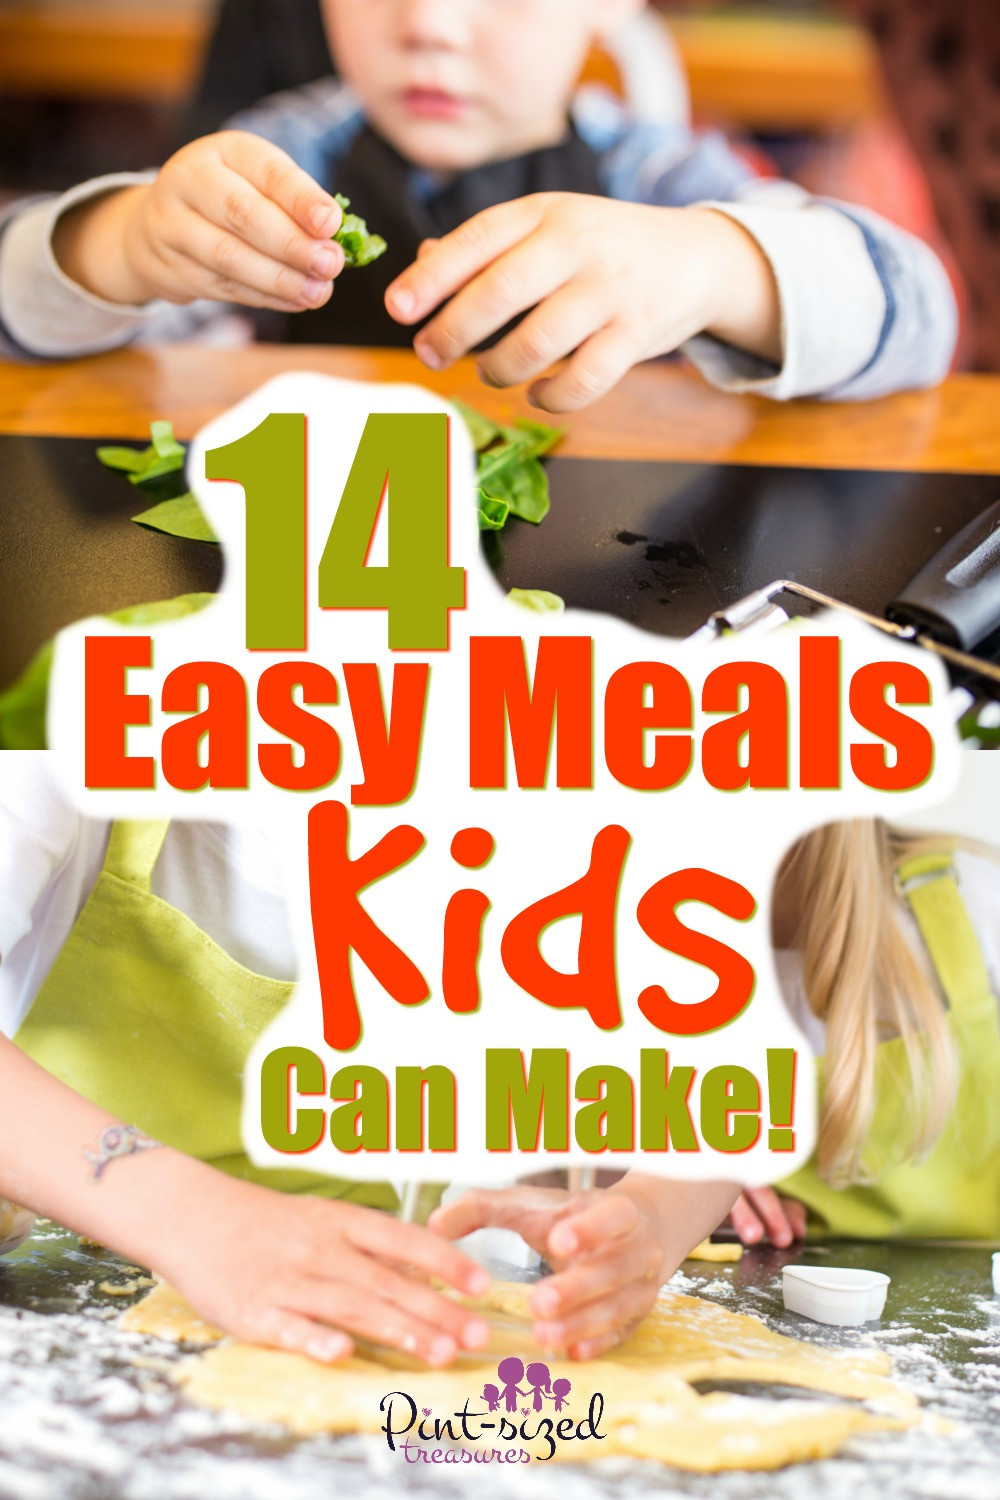 Easy Dinner Recipes For Kids To Make
 14 Easy Meals Kids Can Make